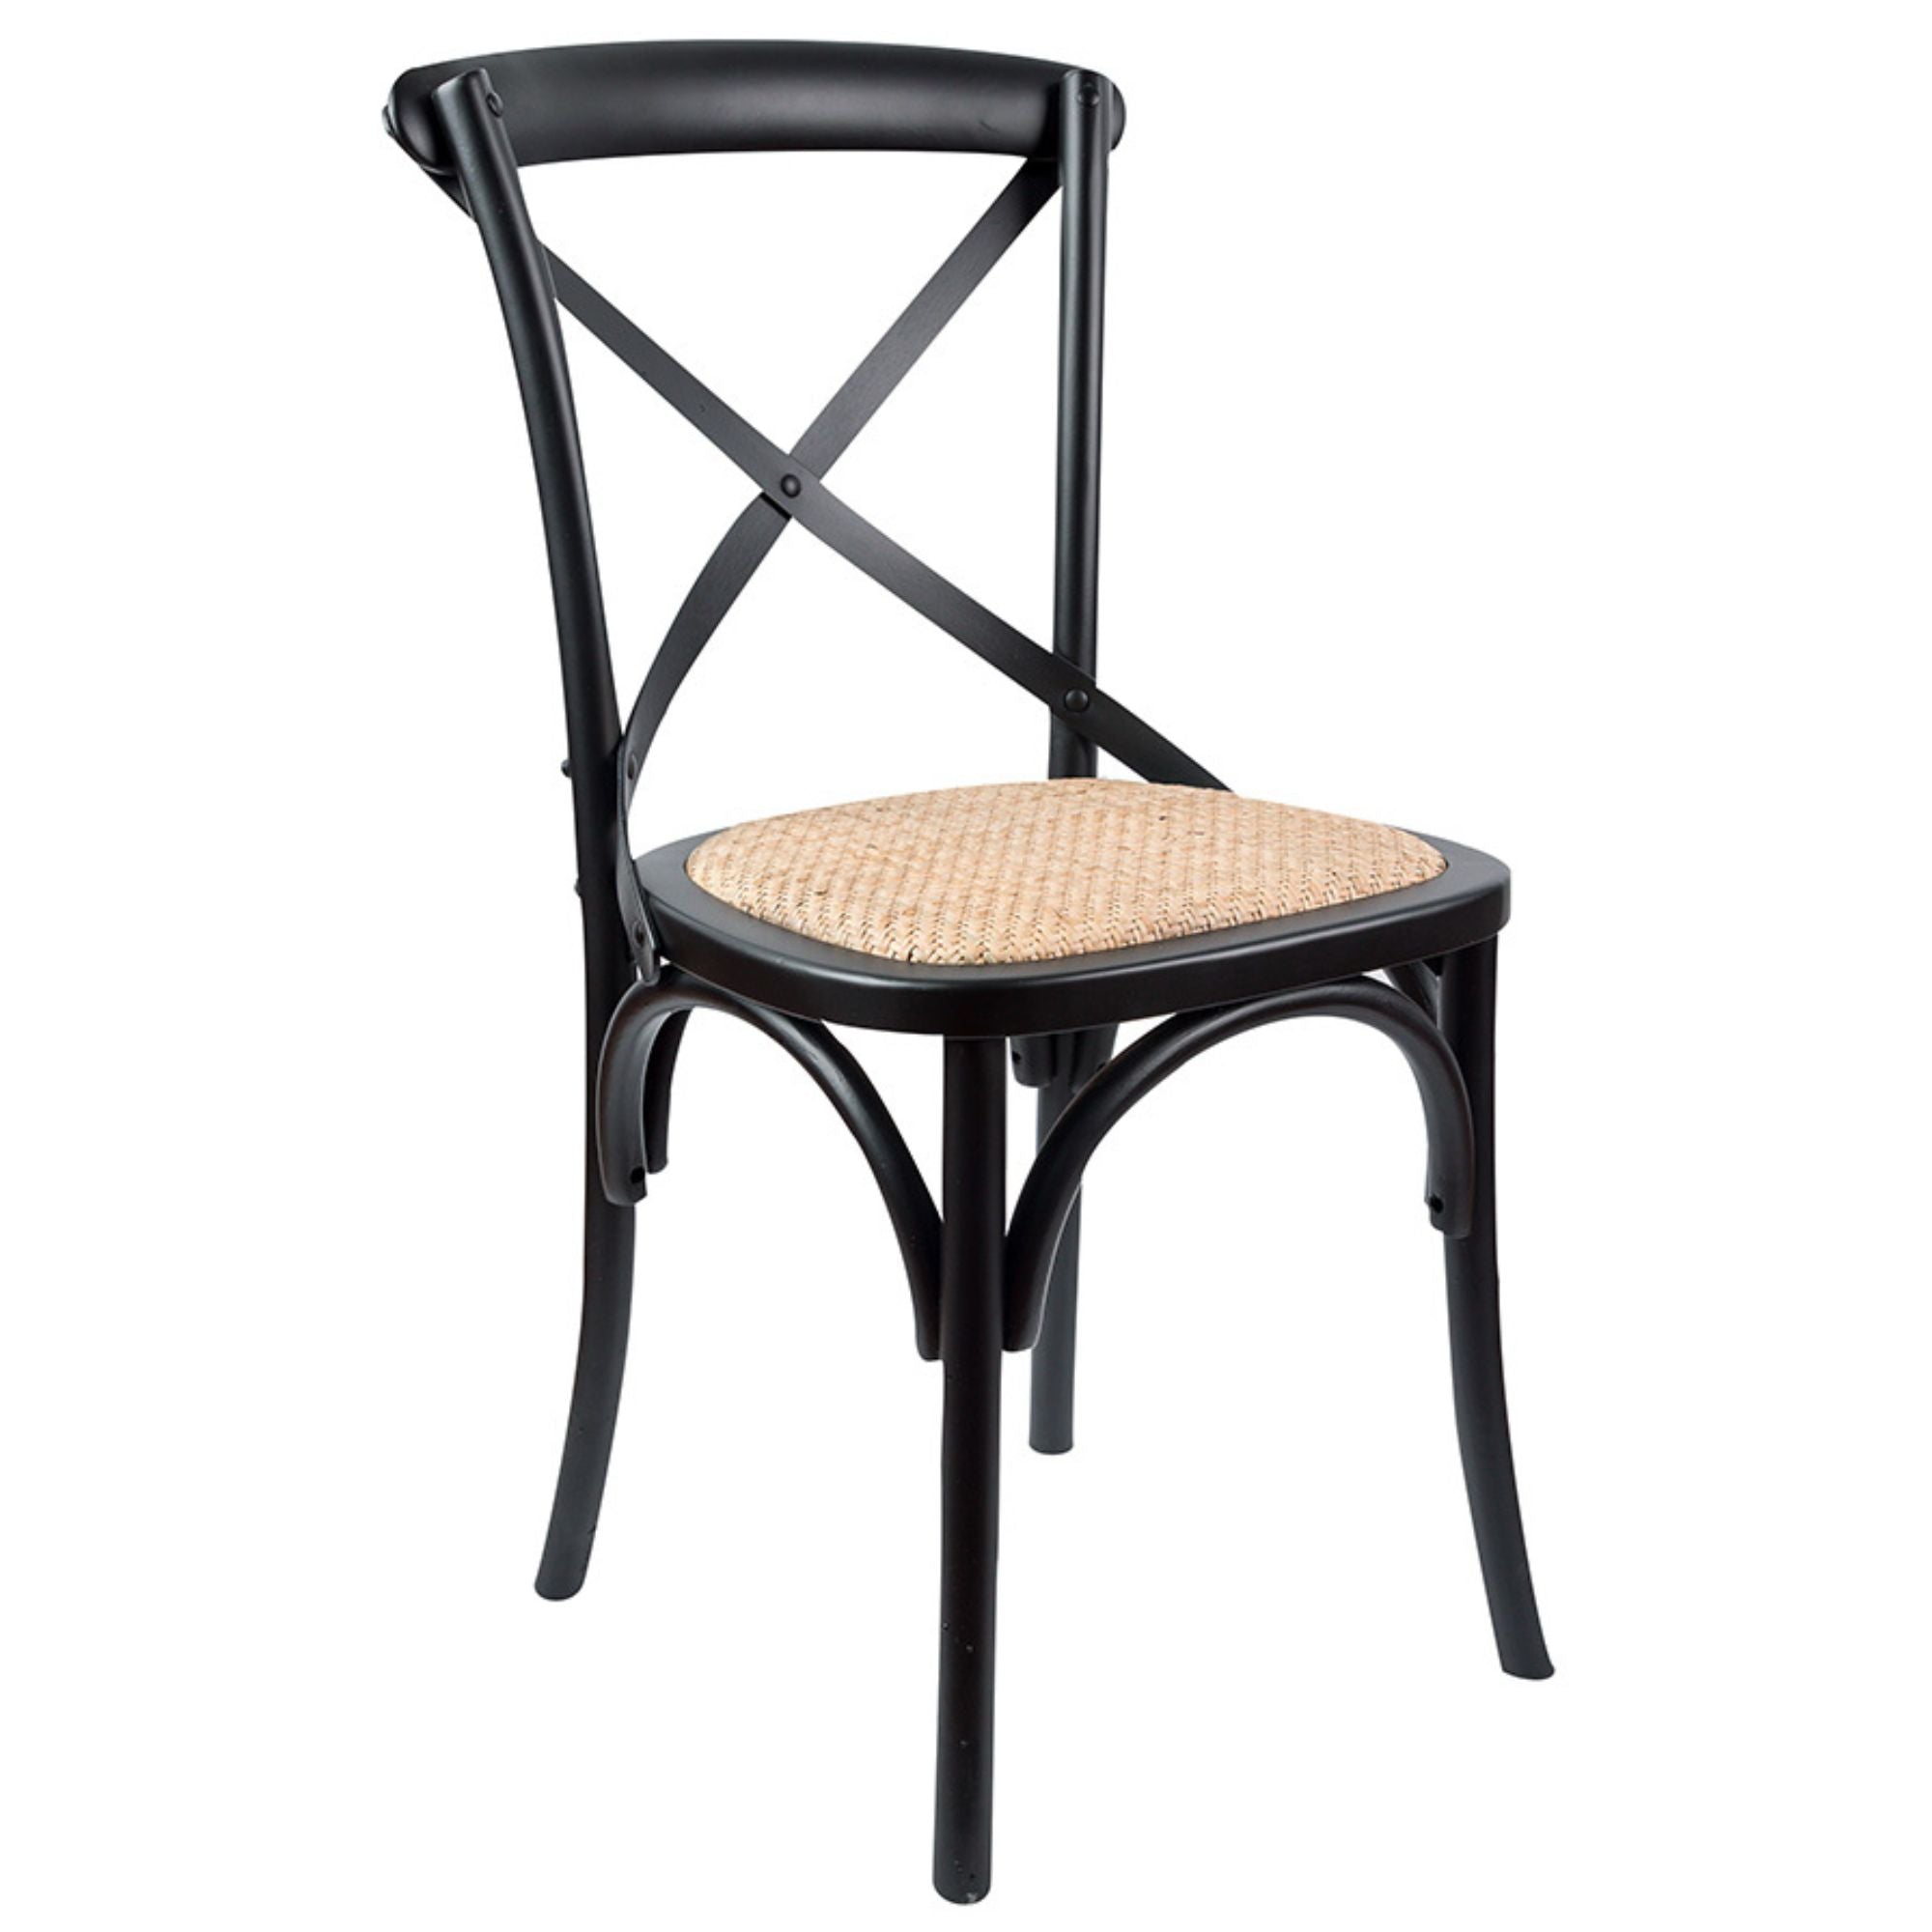 Crossback Dining Chair Set Of 6 Solid Birch Timber Wood Ratan Seat - Black